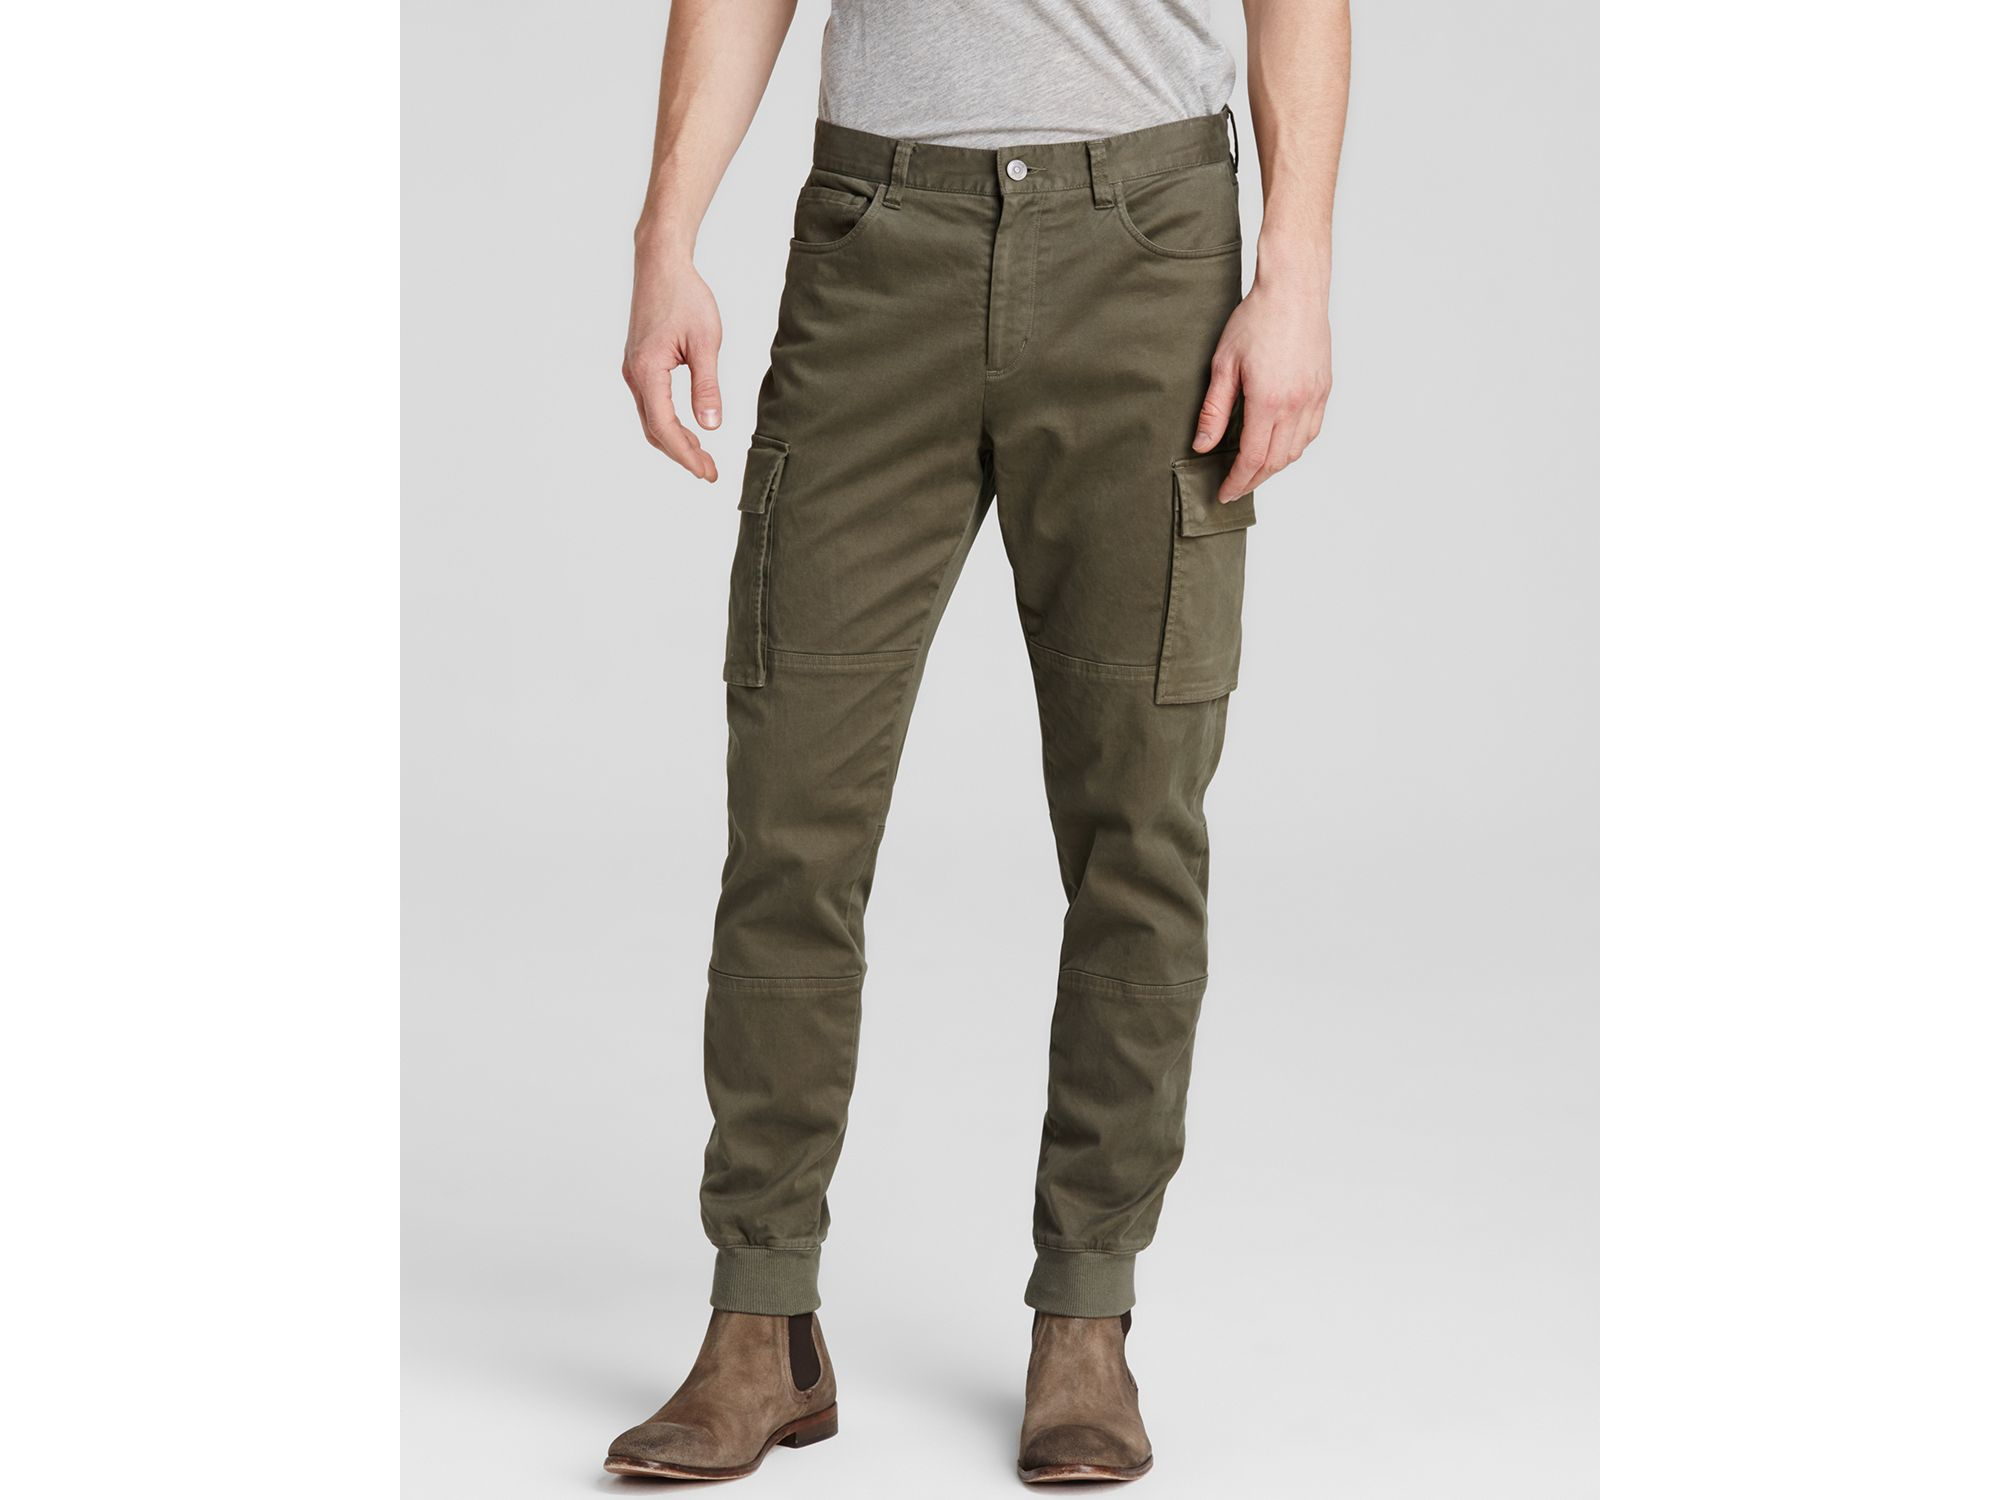 Lyst - Vince Twill Cargo Jogger Pants in Green for Men